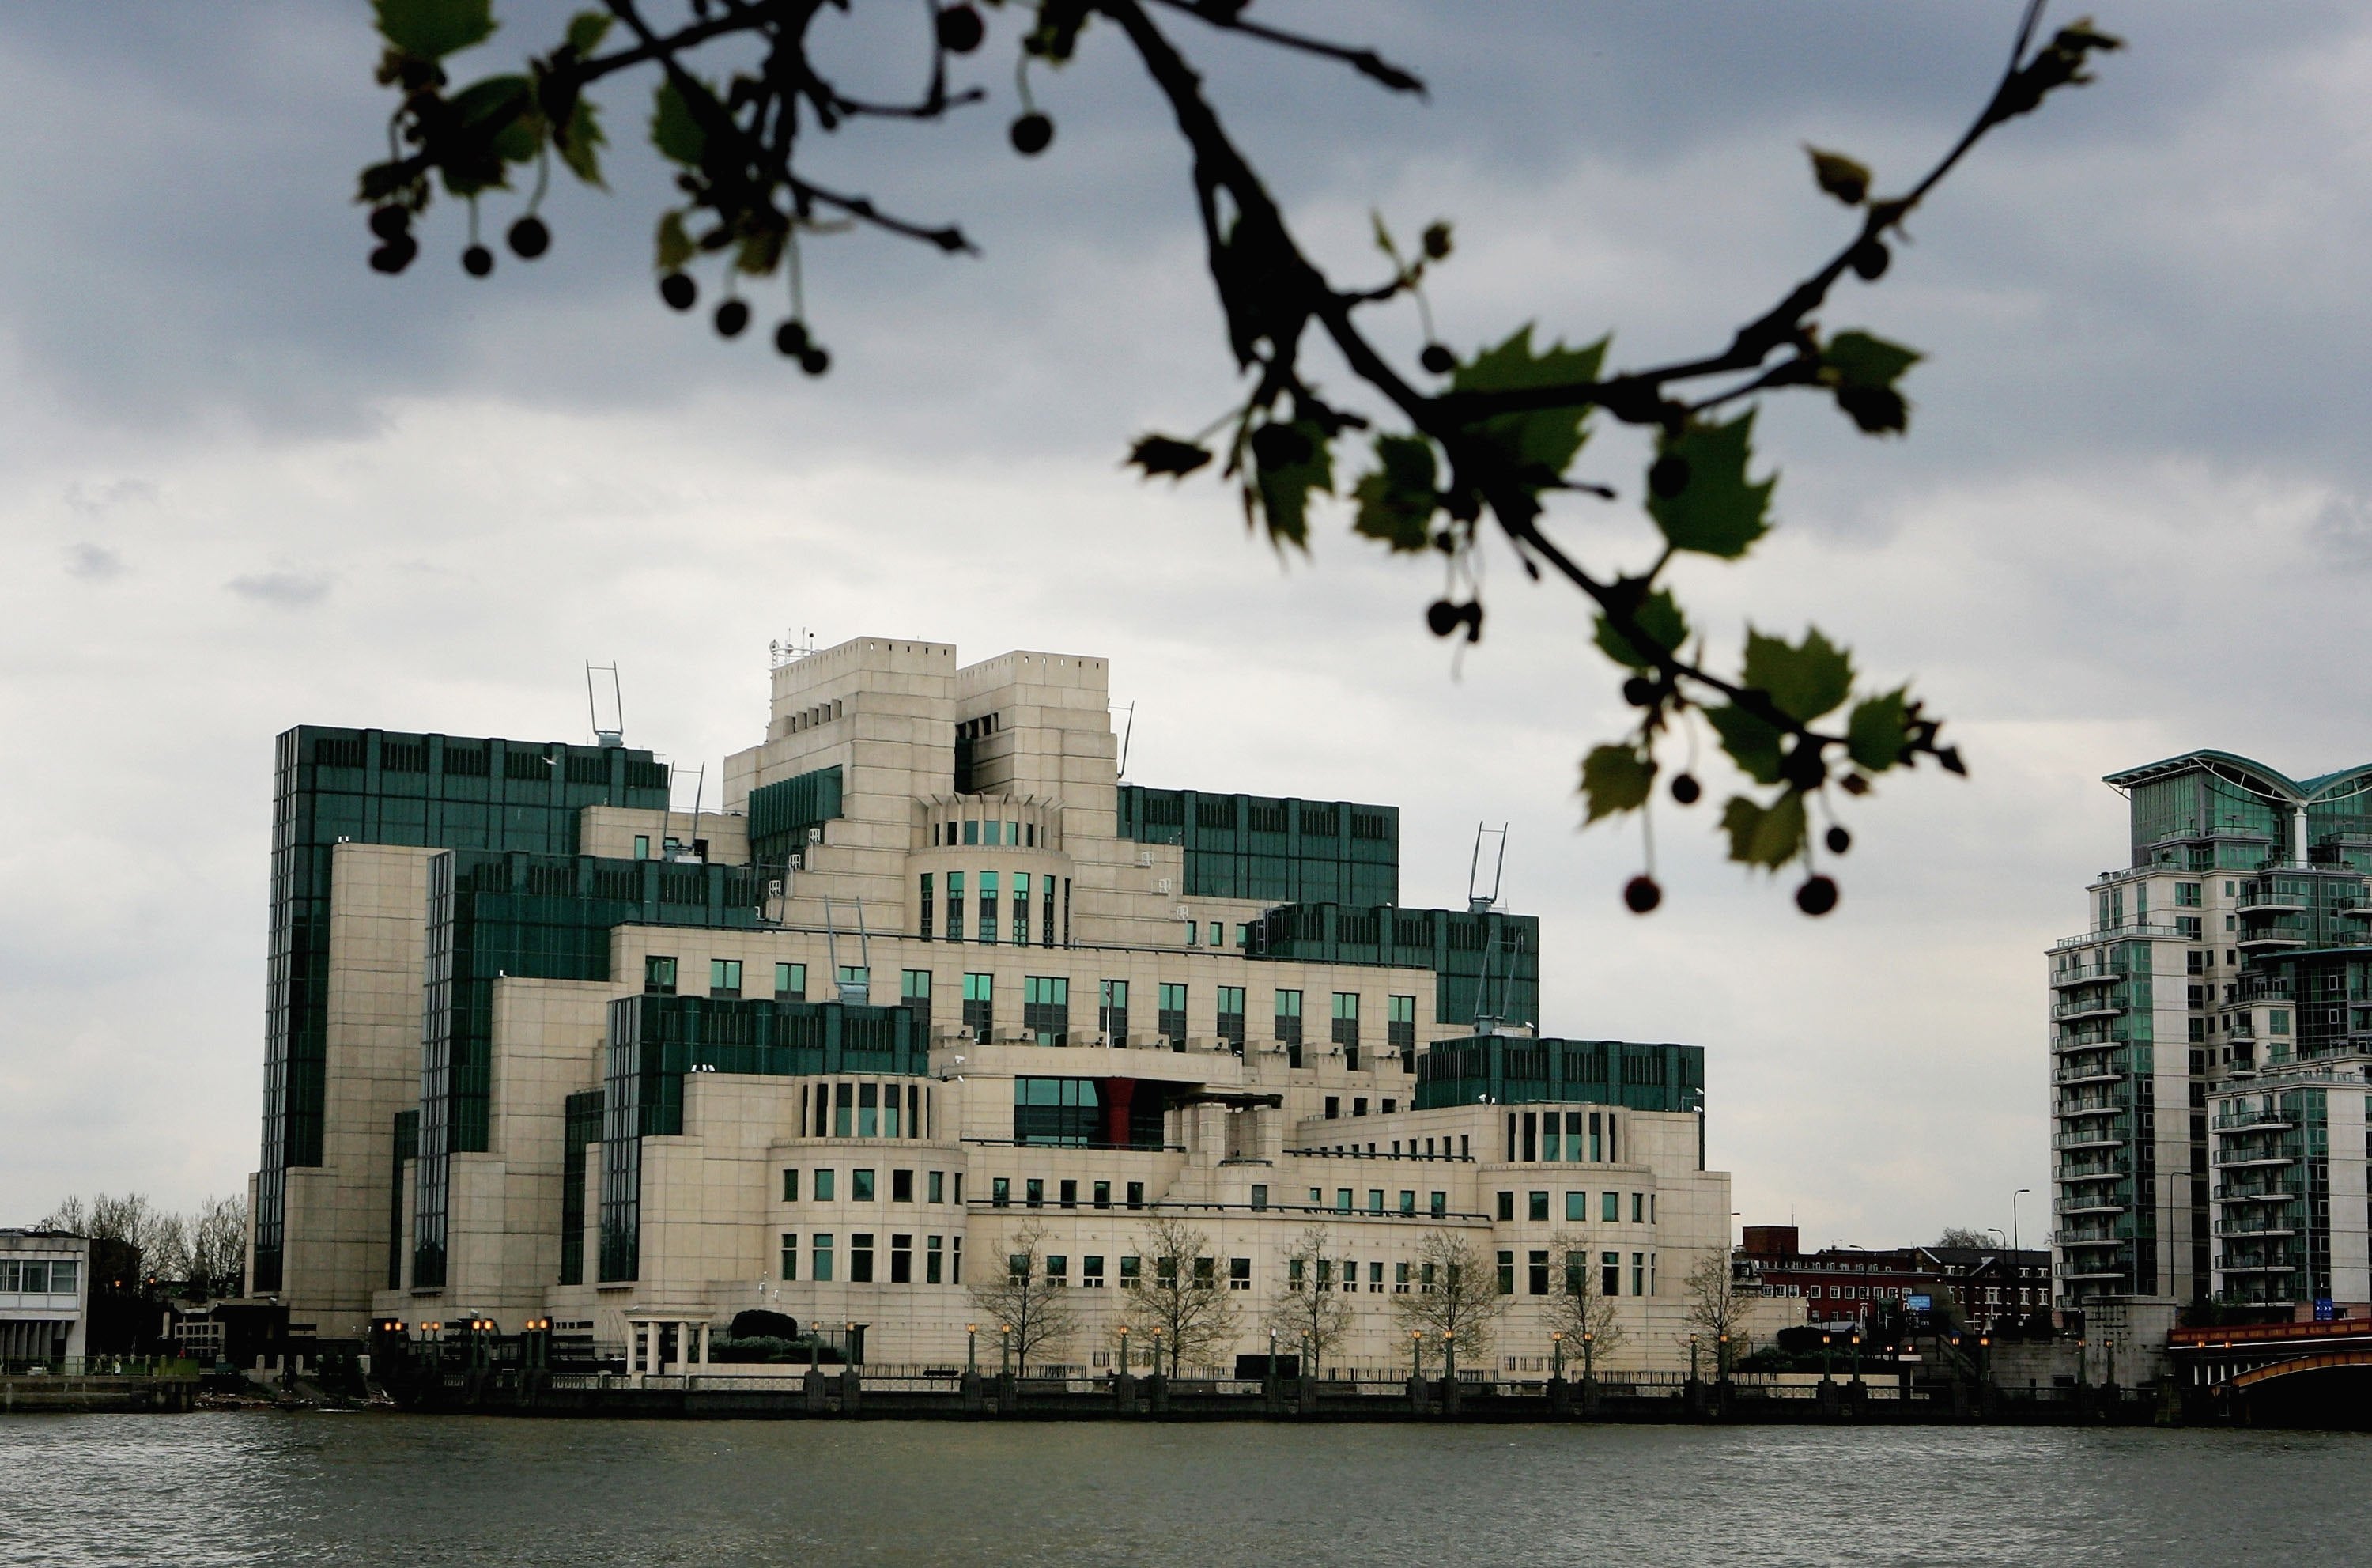 MI6’s headquarters are located at Vauxhall Cross in London